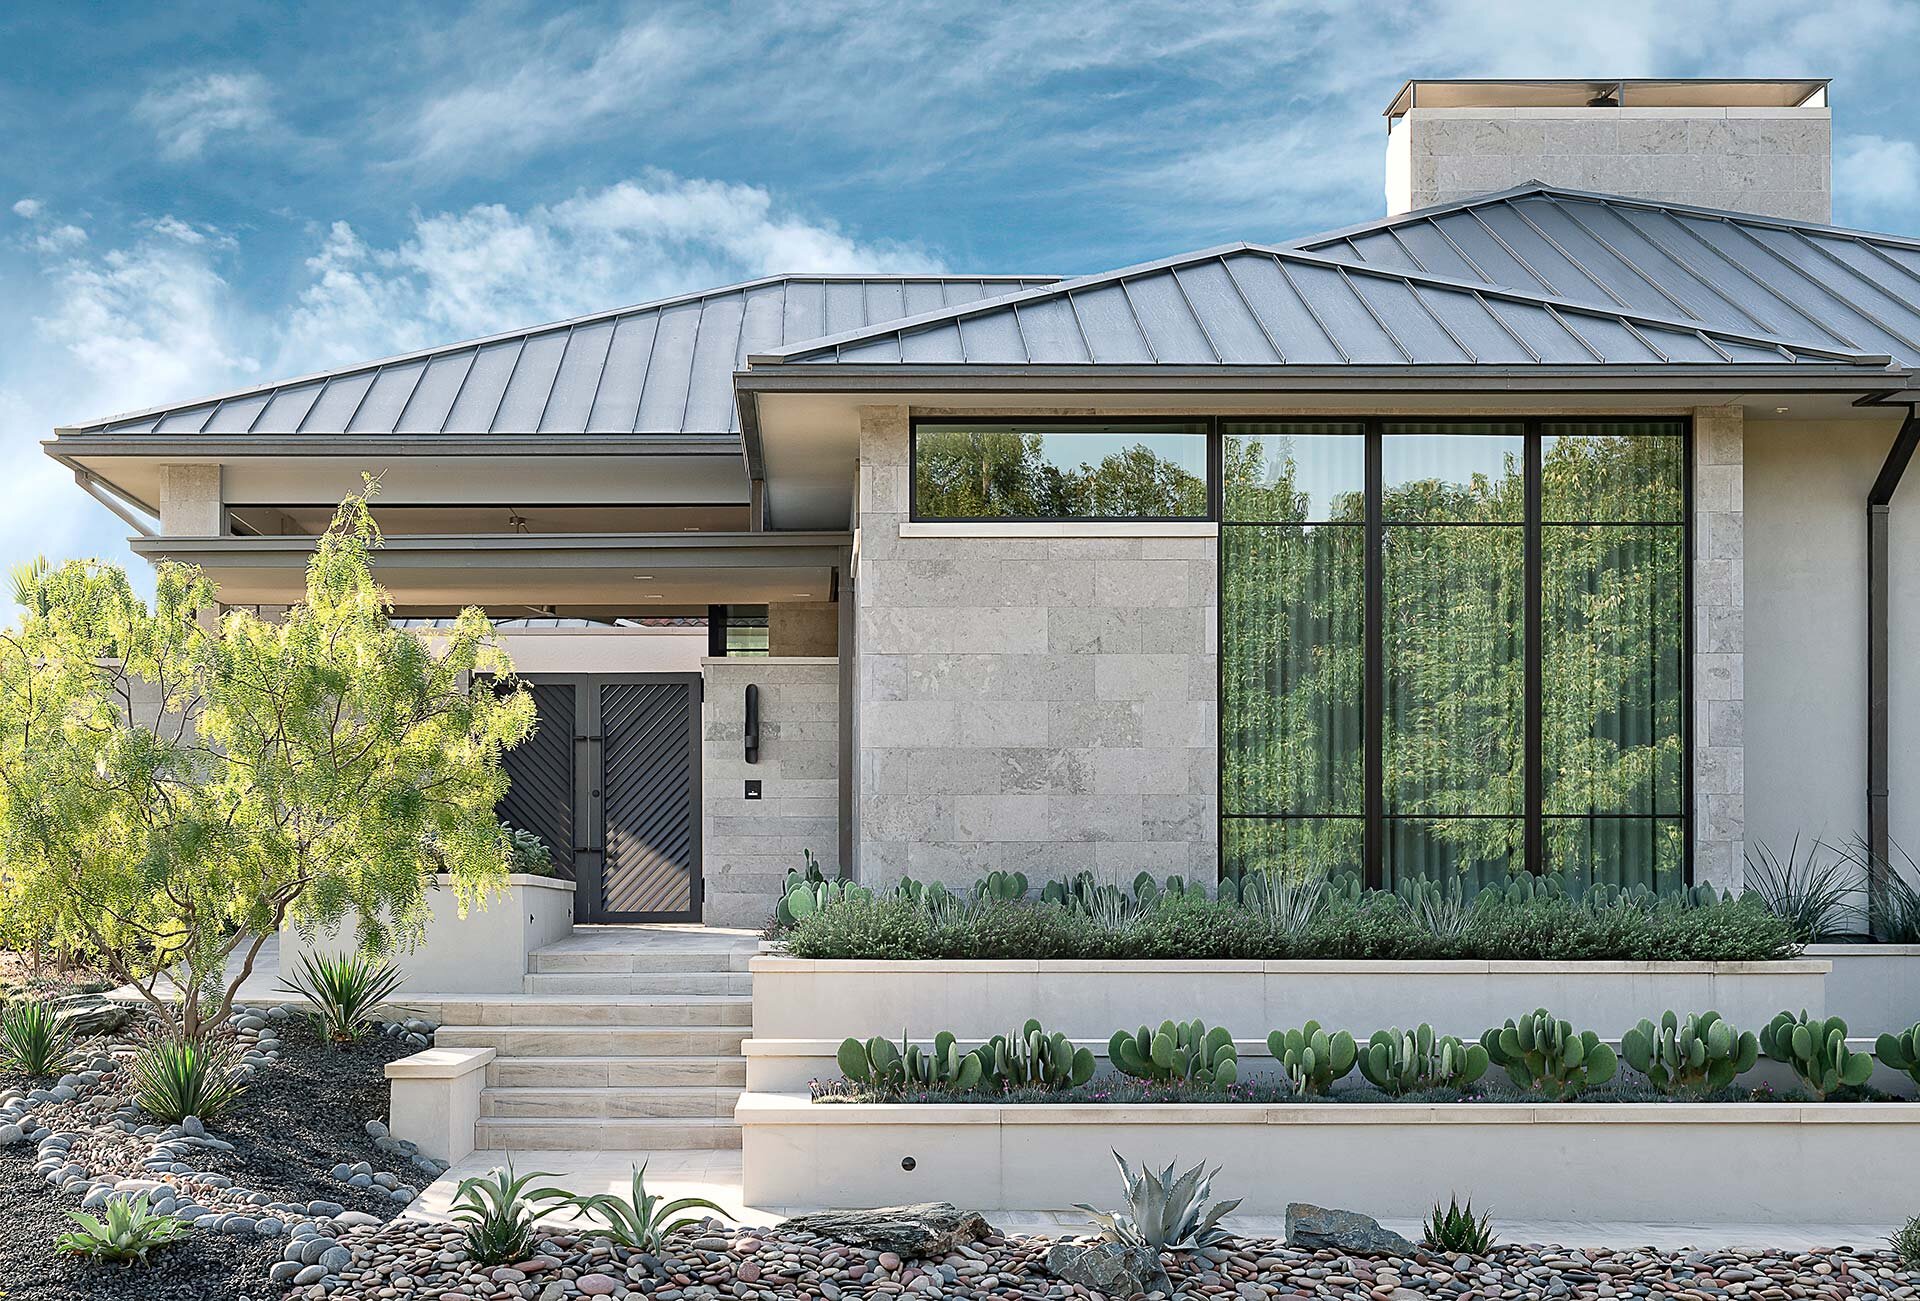  Modern comfortable contemporary home in Fort Worth Texas designed by Bernbaum/Magadini Architects featuring maintenance free exterior and landscaping 